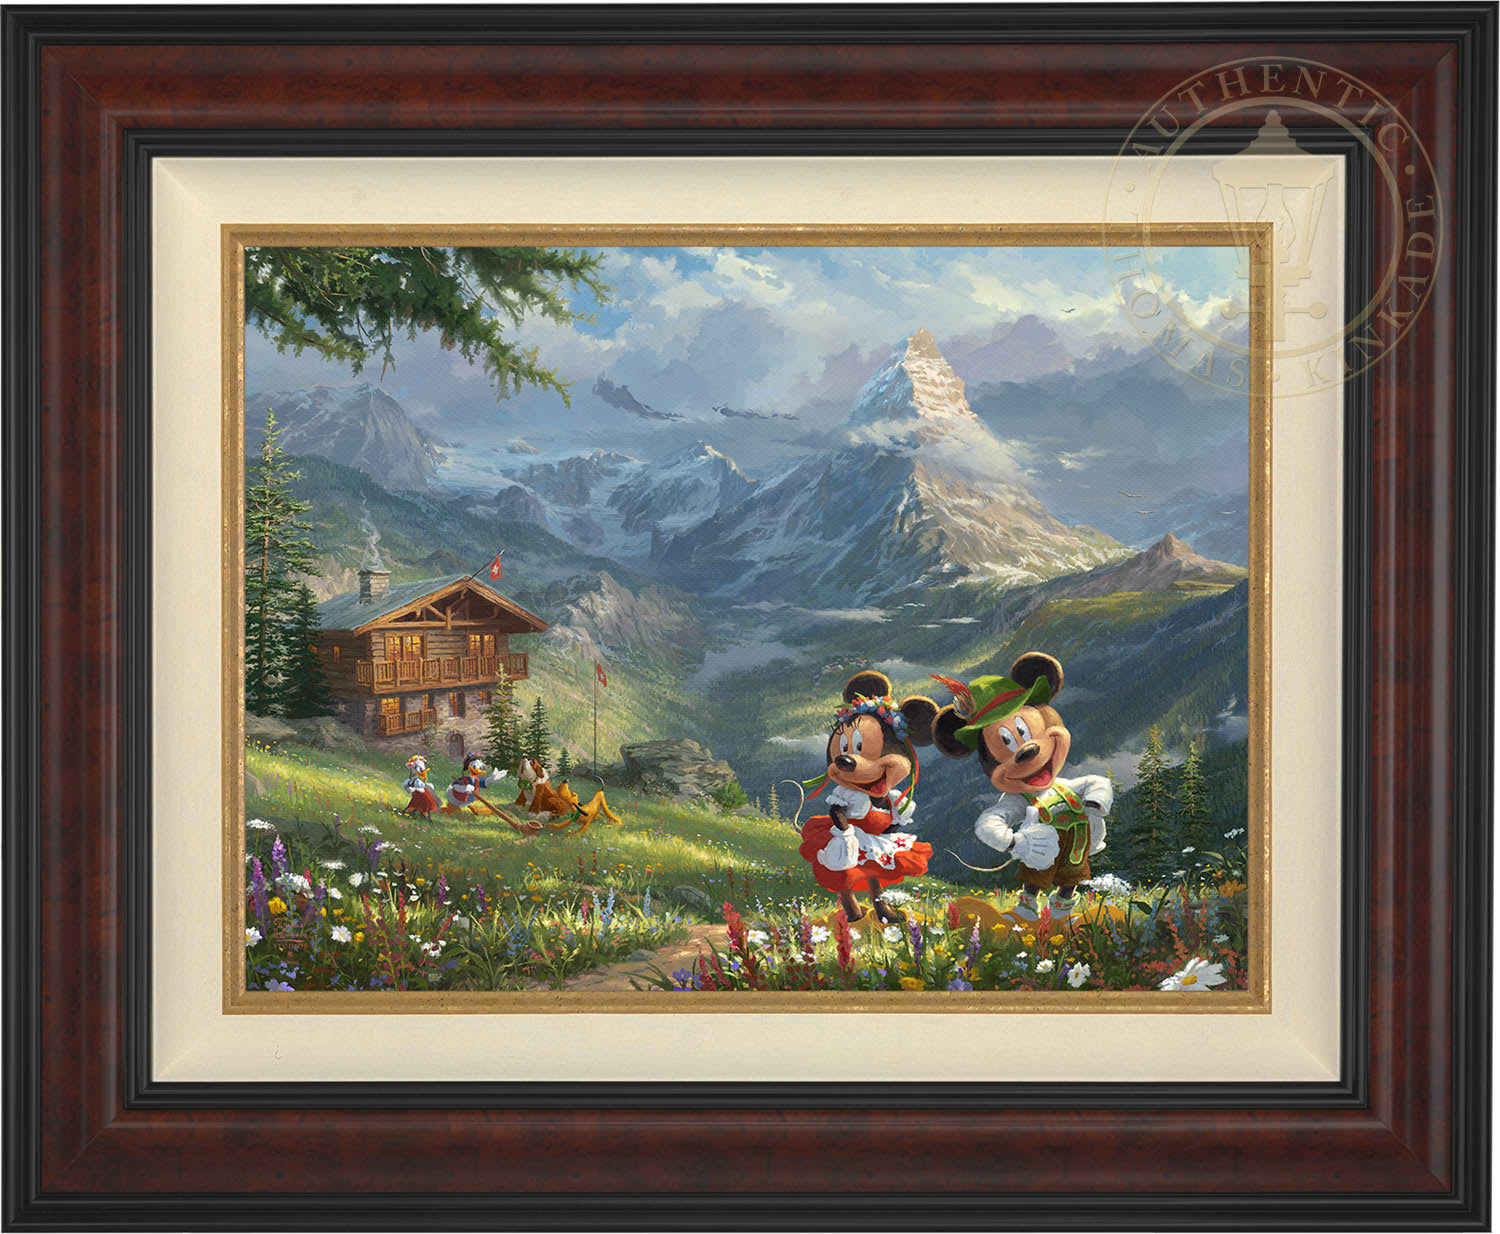 Mickey, Minnie, and Daisy dressed in the traditional Swiss attire, at a distance near the log cabin Donald, Daisy and Pluto have found a new friend. Burl Frame